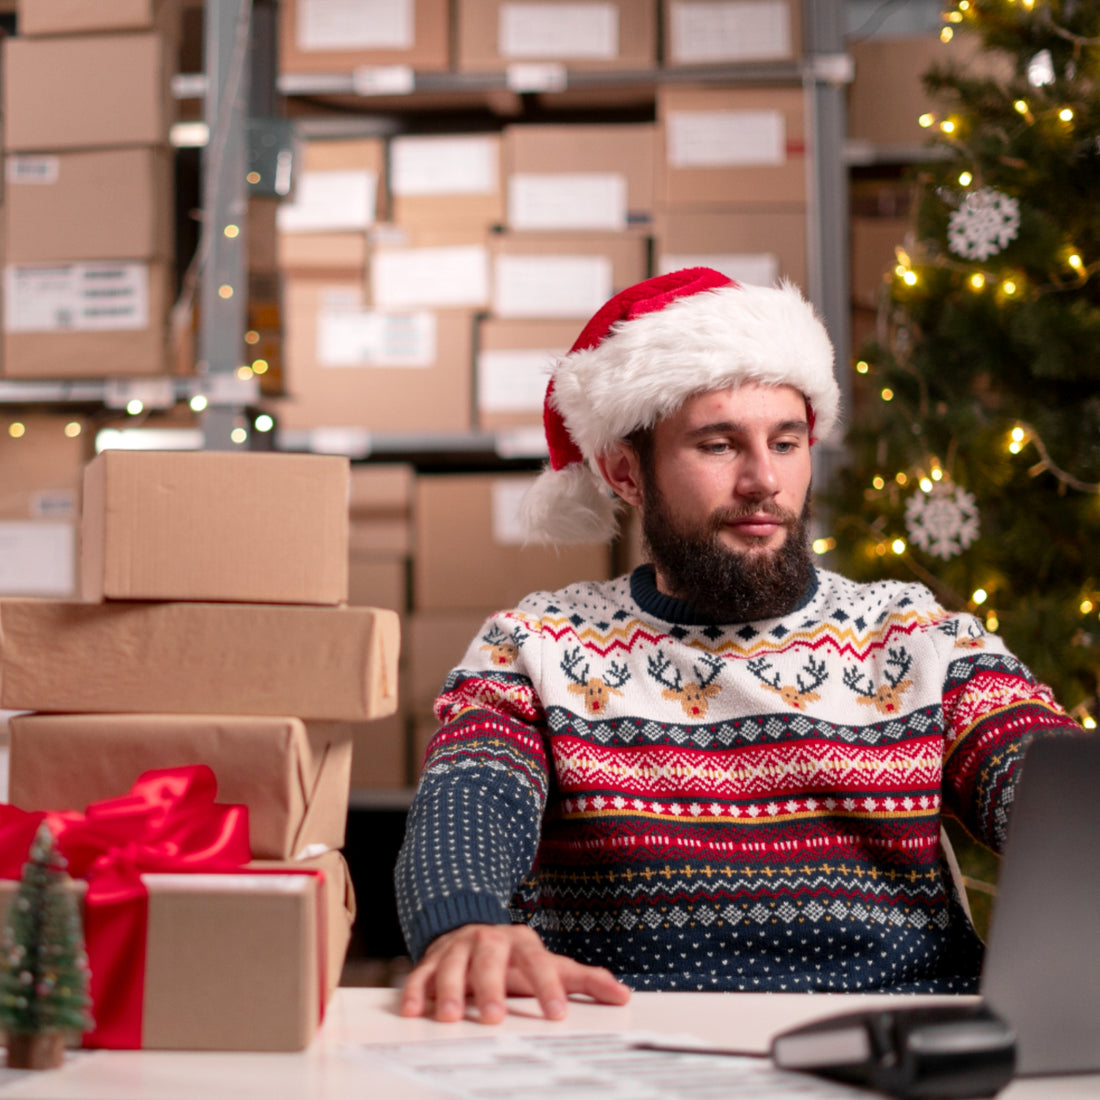 Young man inventory clerk working on holiday orders in a small business.